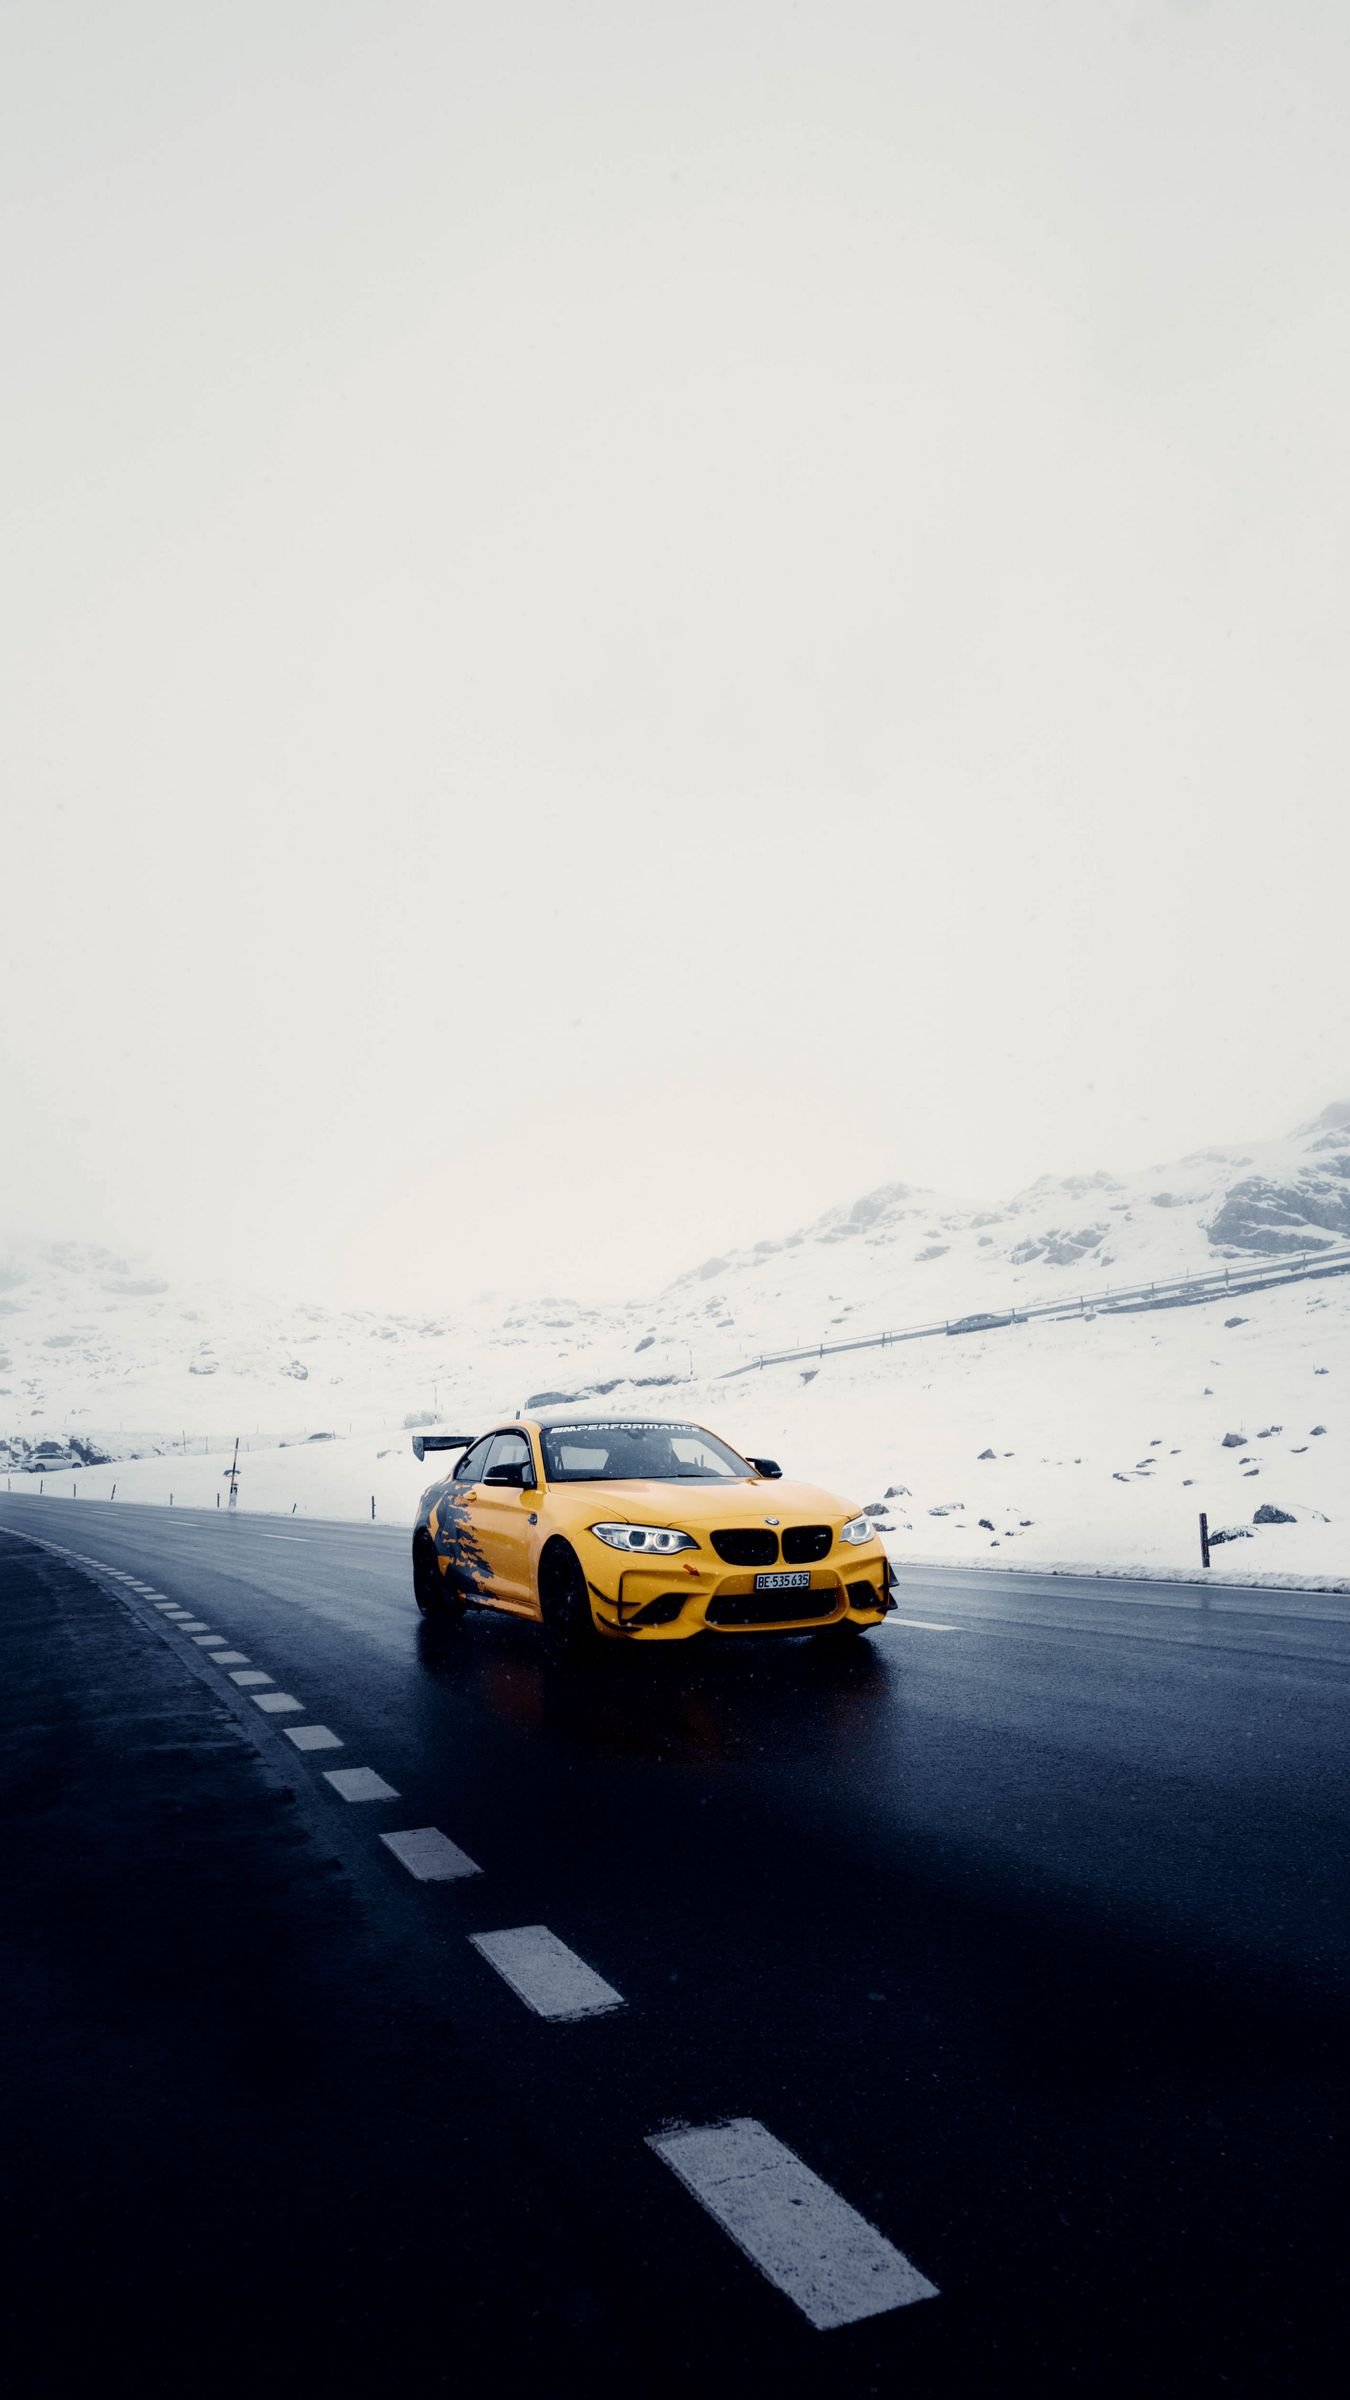 Download wallpaper 1350x2400 car, sports car, yellow, road, snow iphone 8+/7+/6s+/for parallax HD background